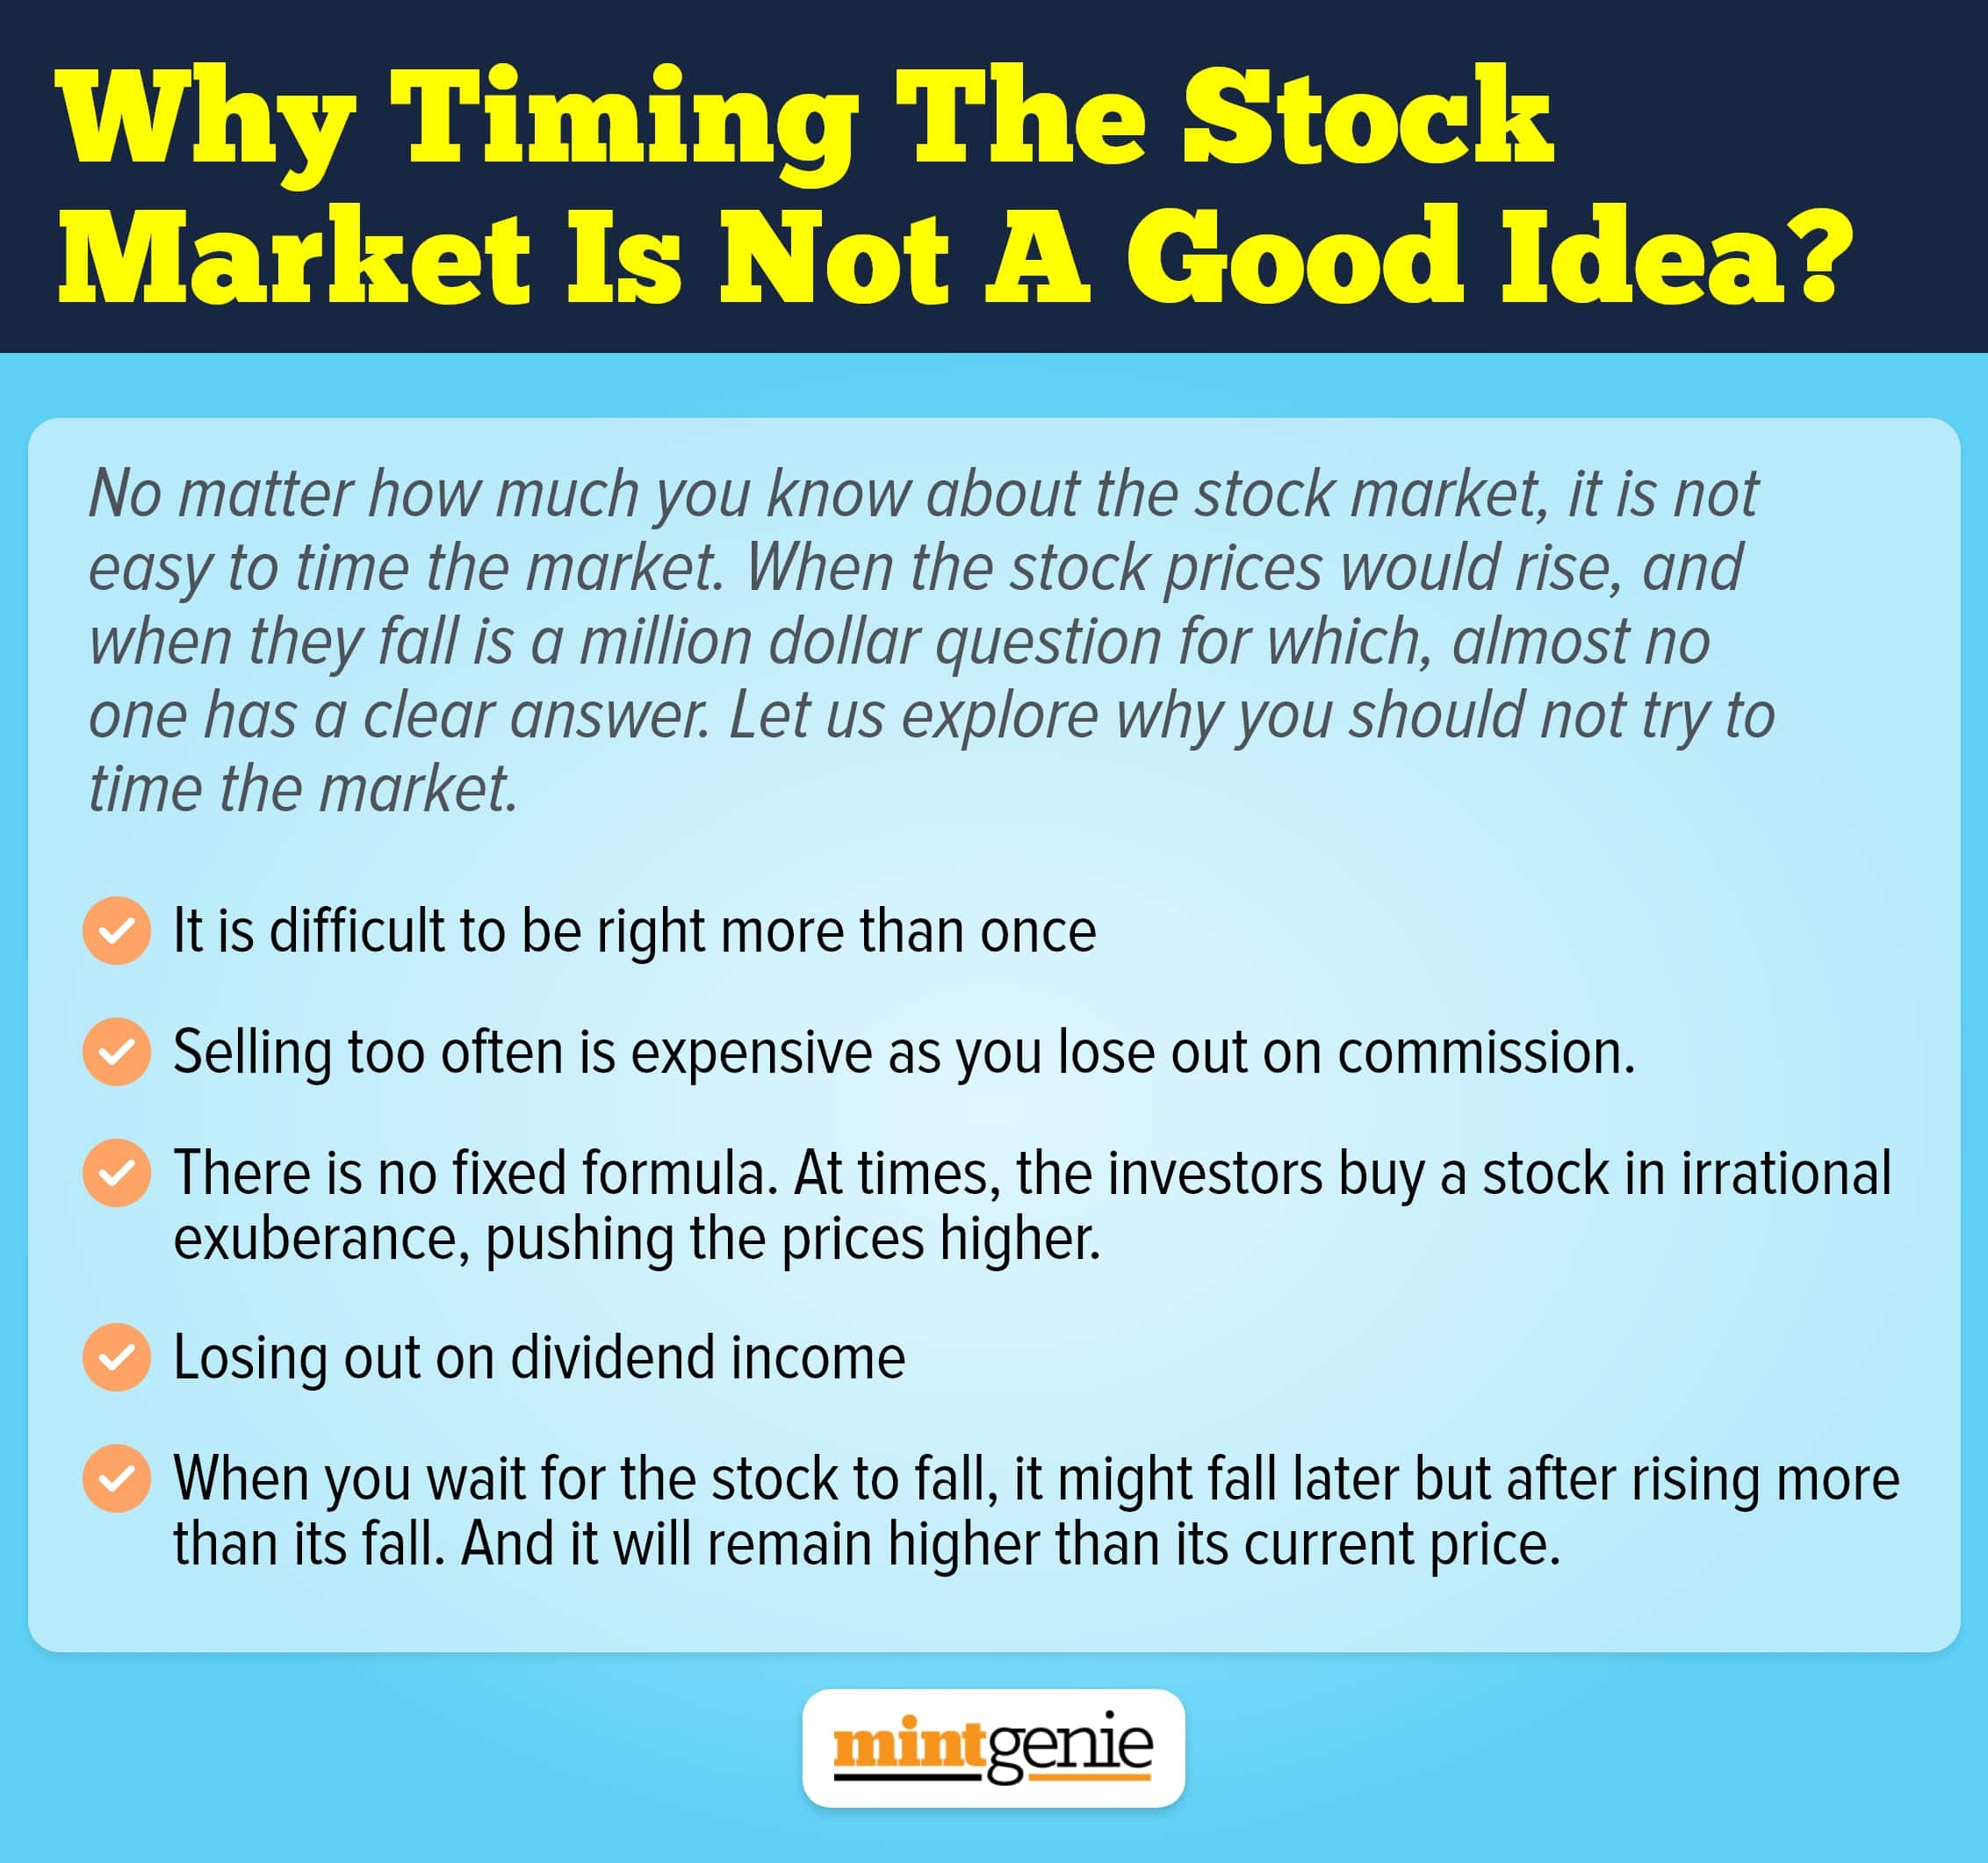 We explain why it is not a good idea to try to time the markets.